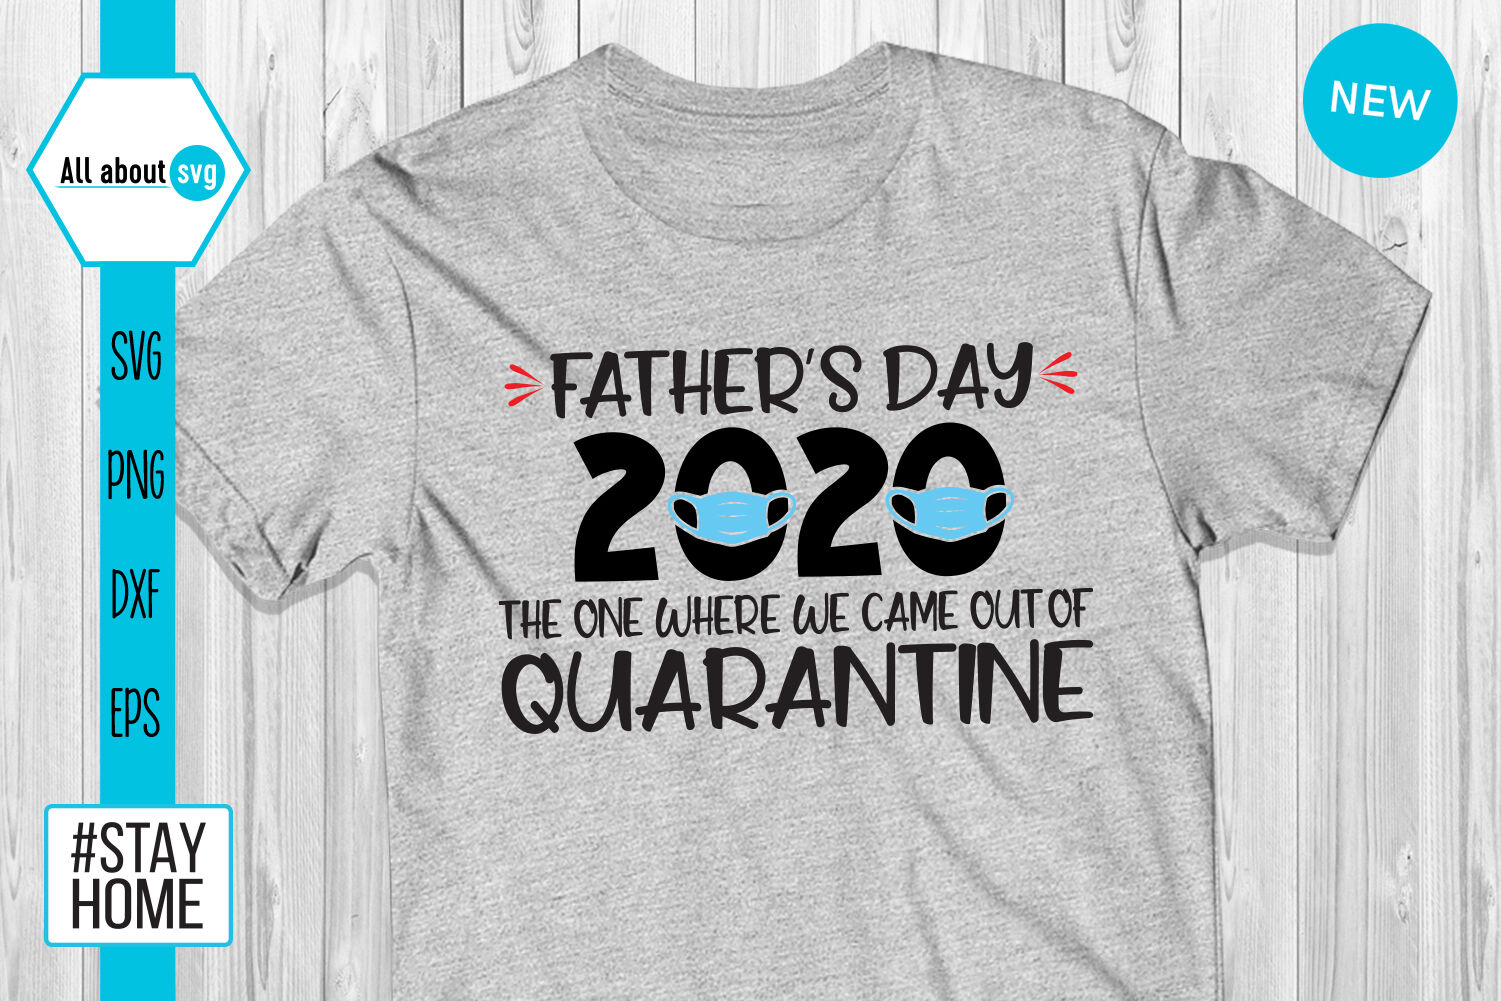 Download Fathers Day 2020 Out Of Quarantine Svg By All About Svg ...